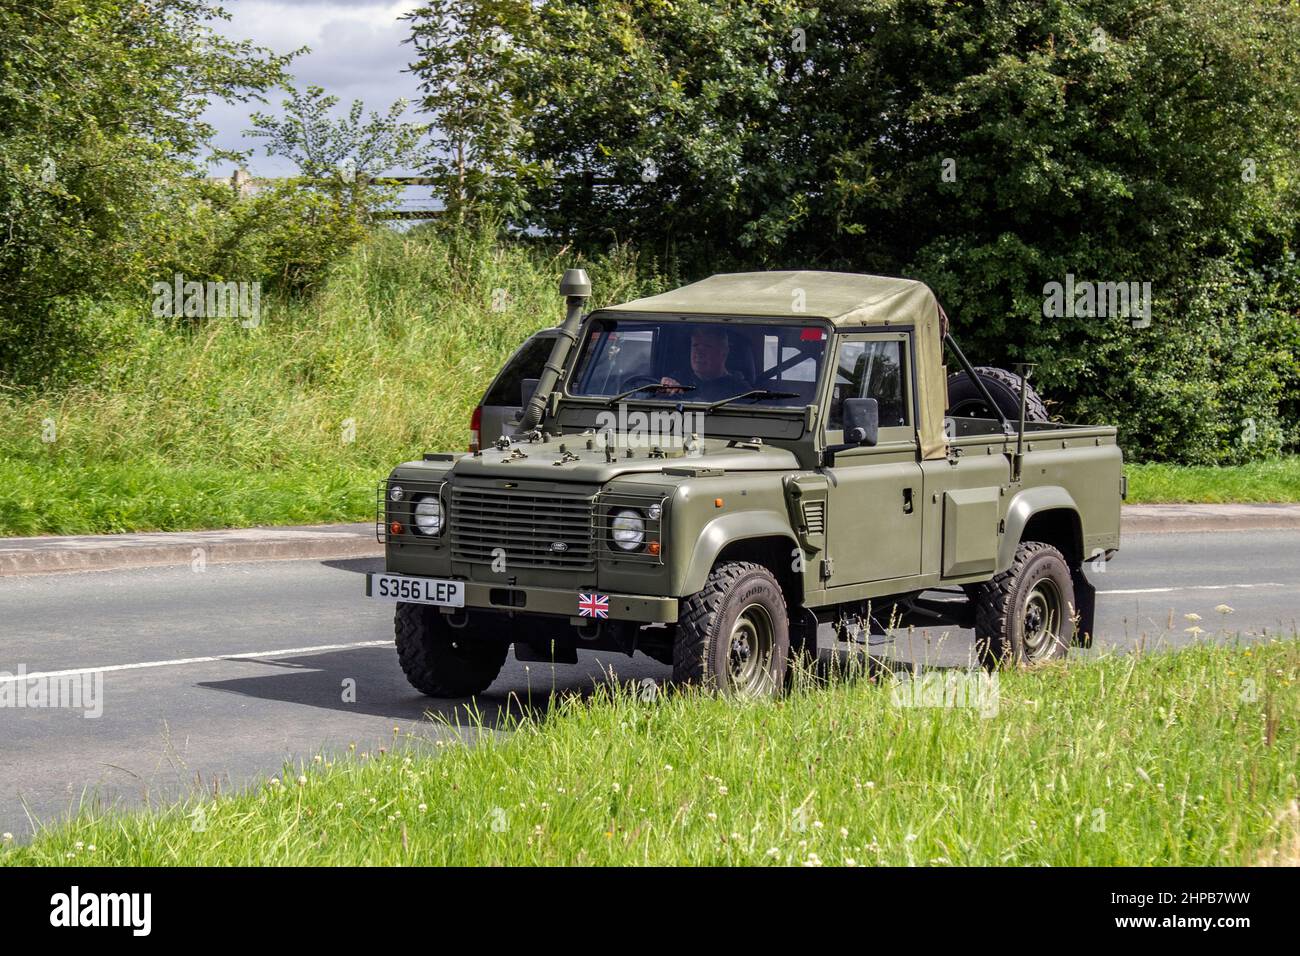 1998 90s nineties Nato green army khaki Land Rover Defender, X MOD Signals – 110 Defender WOLF 2500cc diesel; Stock Photo